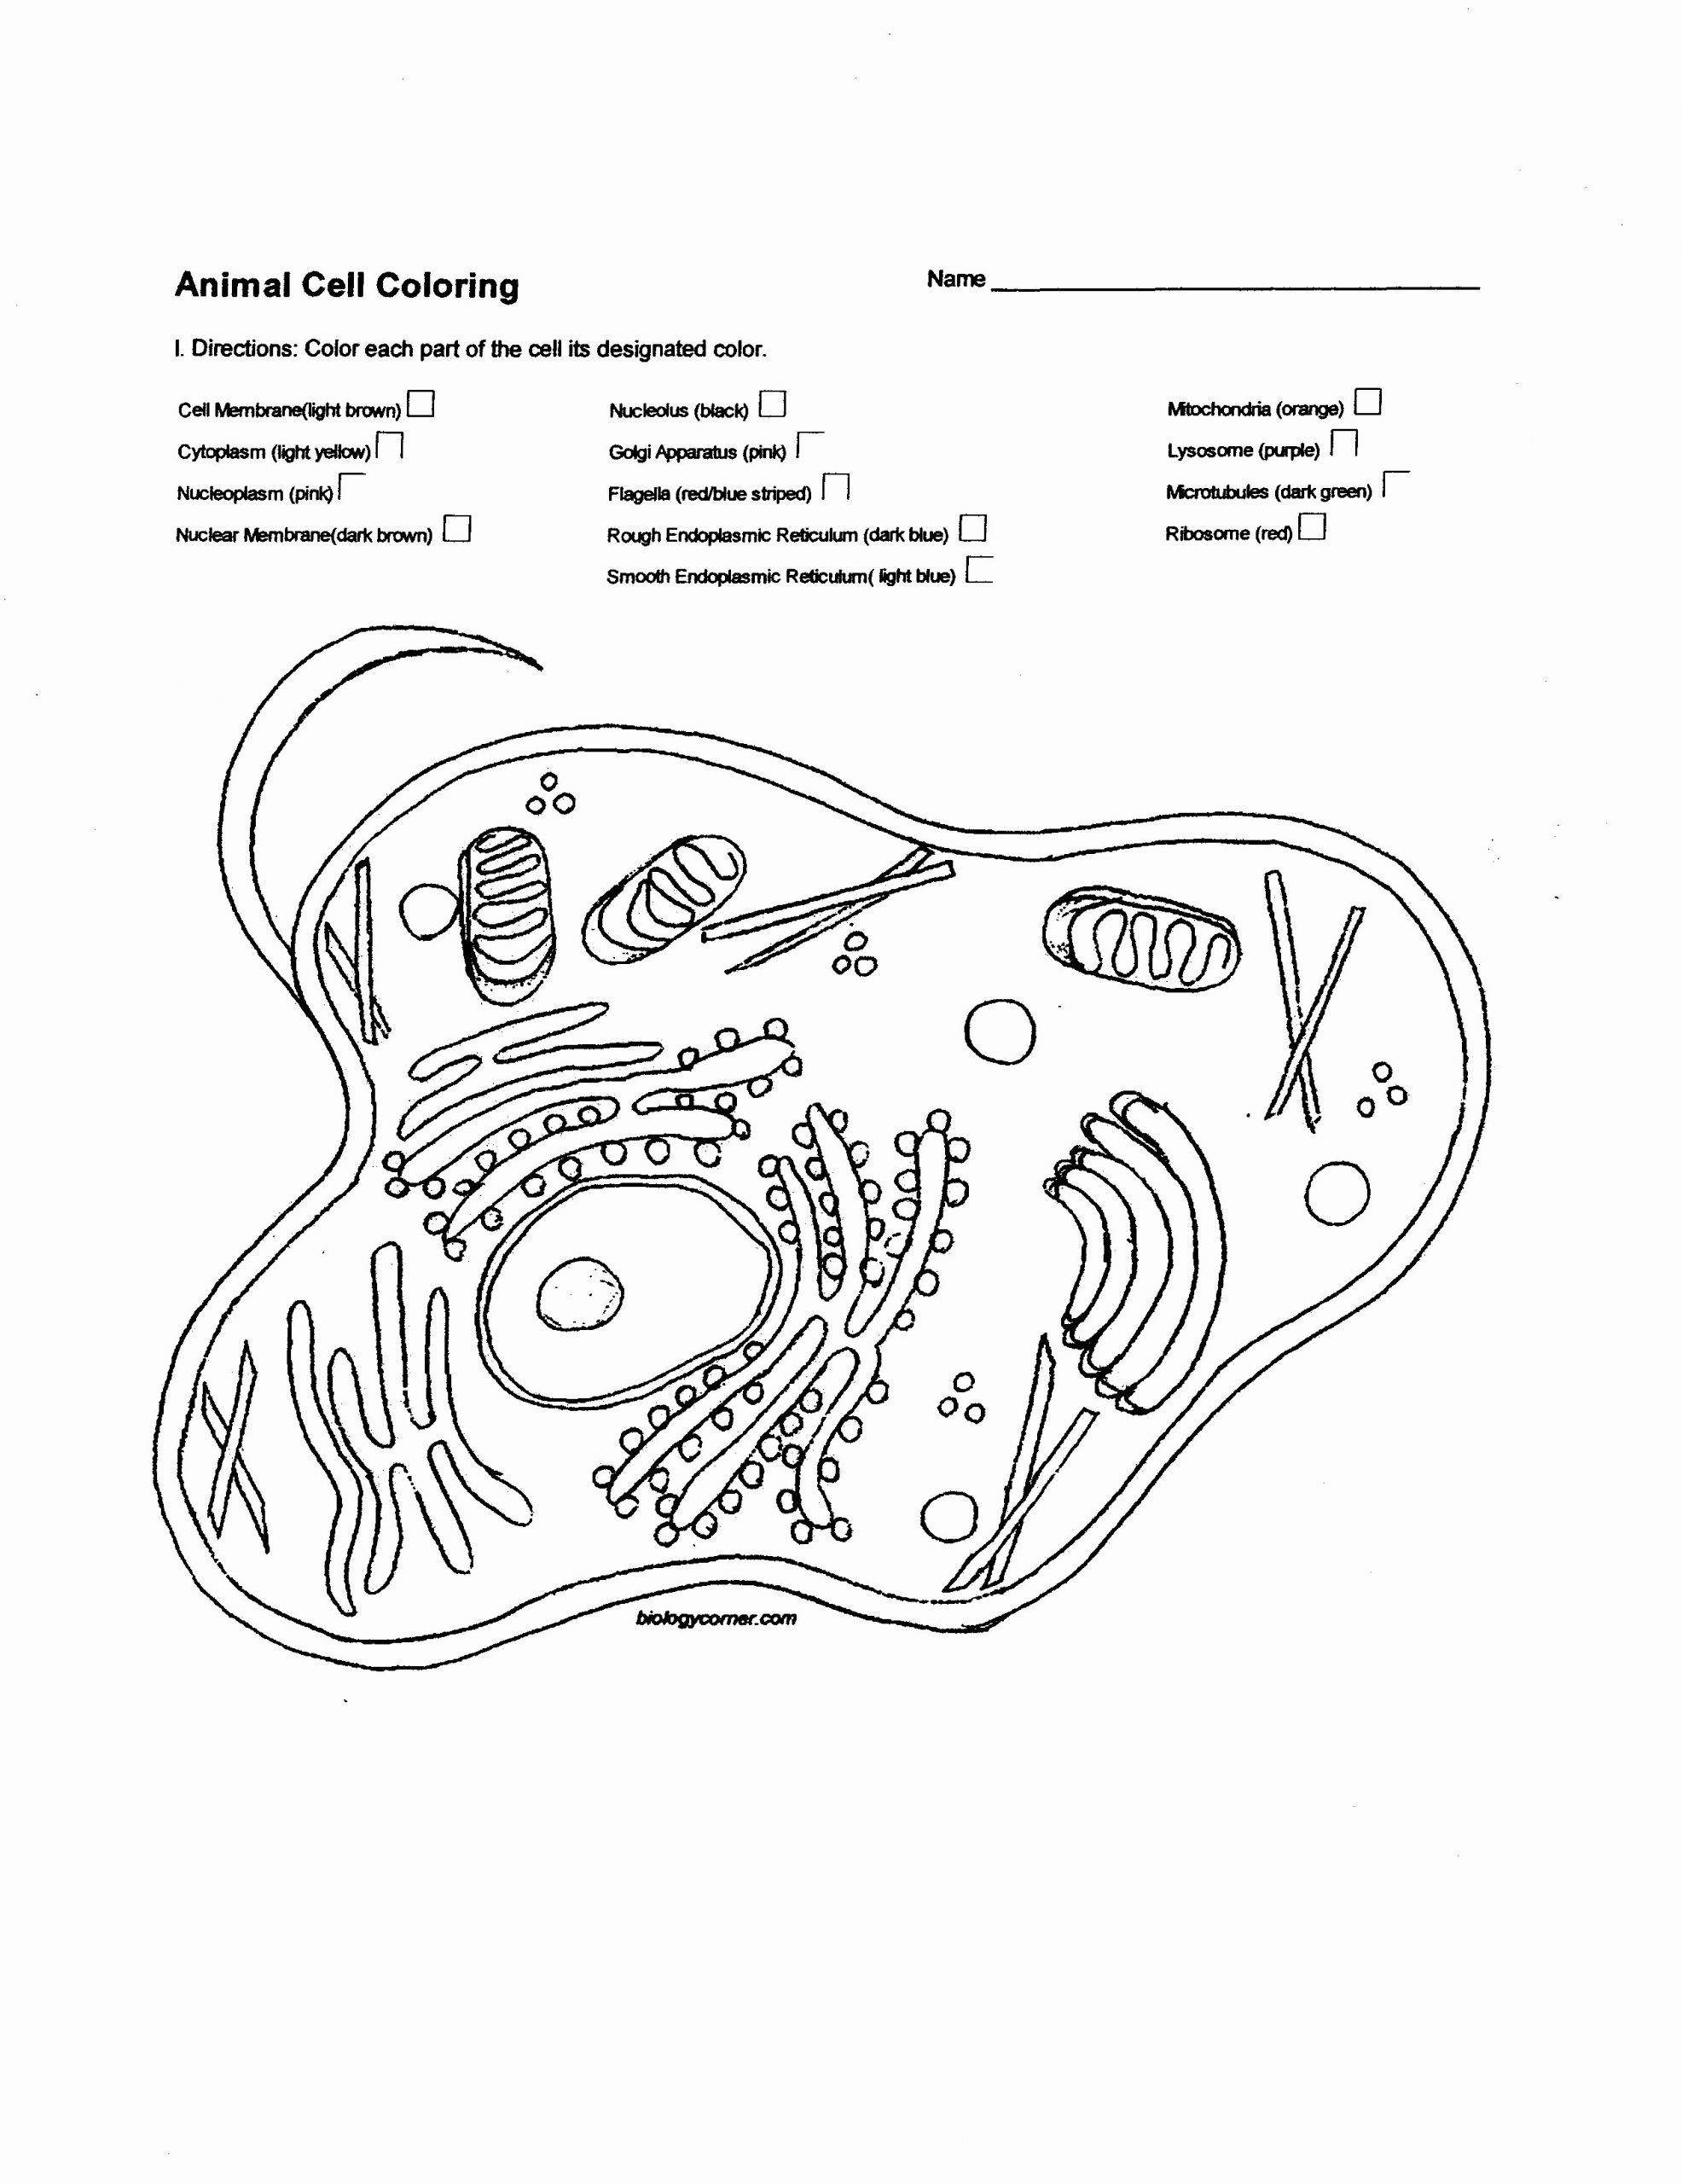 Animal Cells Coloring Worksheet Cell Membrane Coloring Worksheet Promotiontablecovers